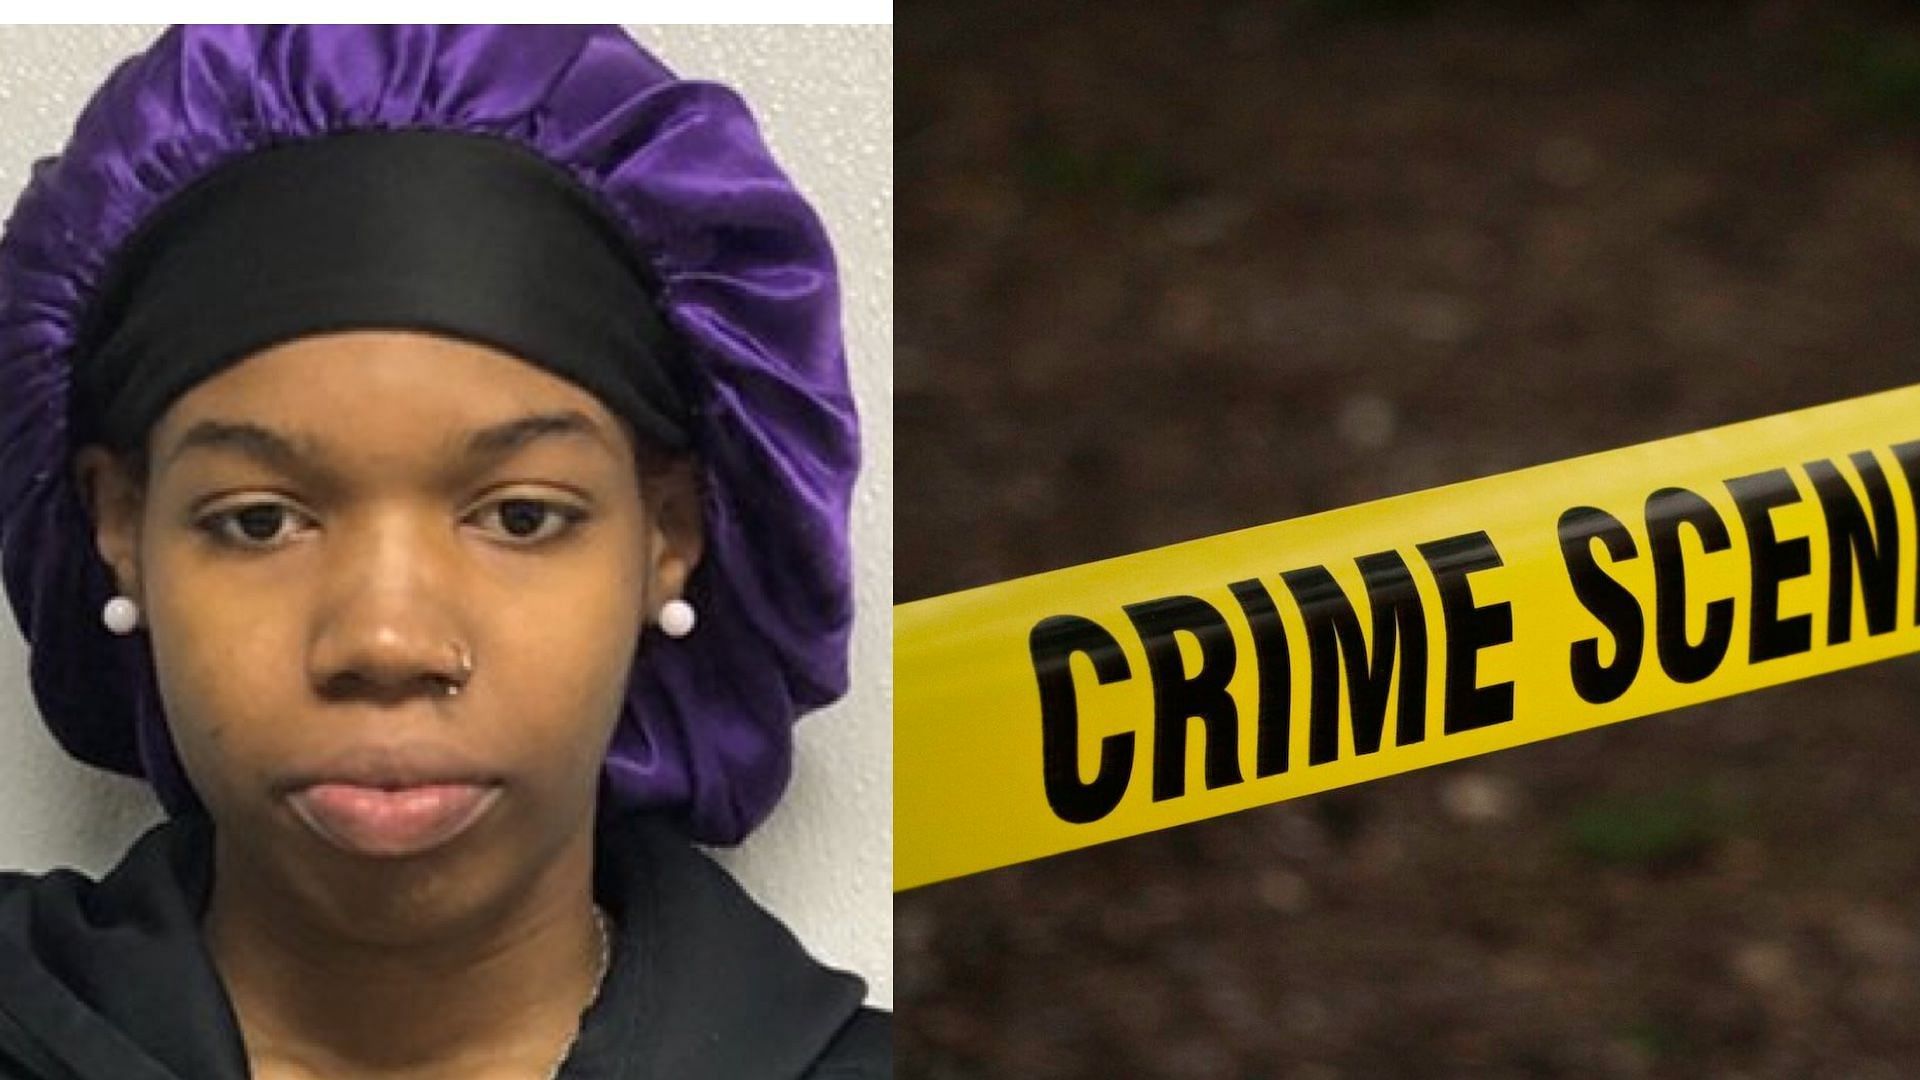 Latayzia Forbes and A Crime Scene (Image Via Twitter/@LPaulKang and @M&ocirc;n Search and Rescue)